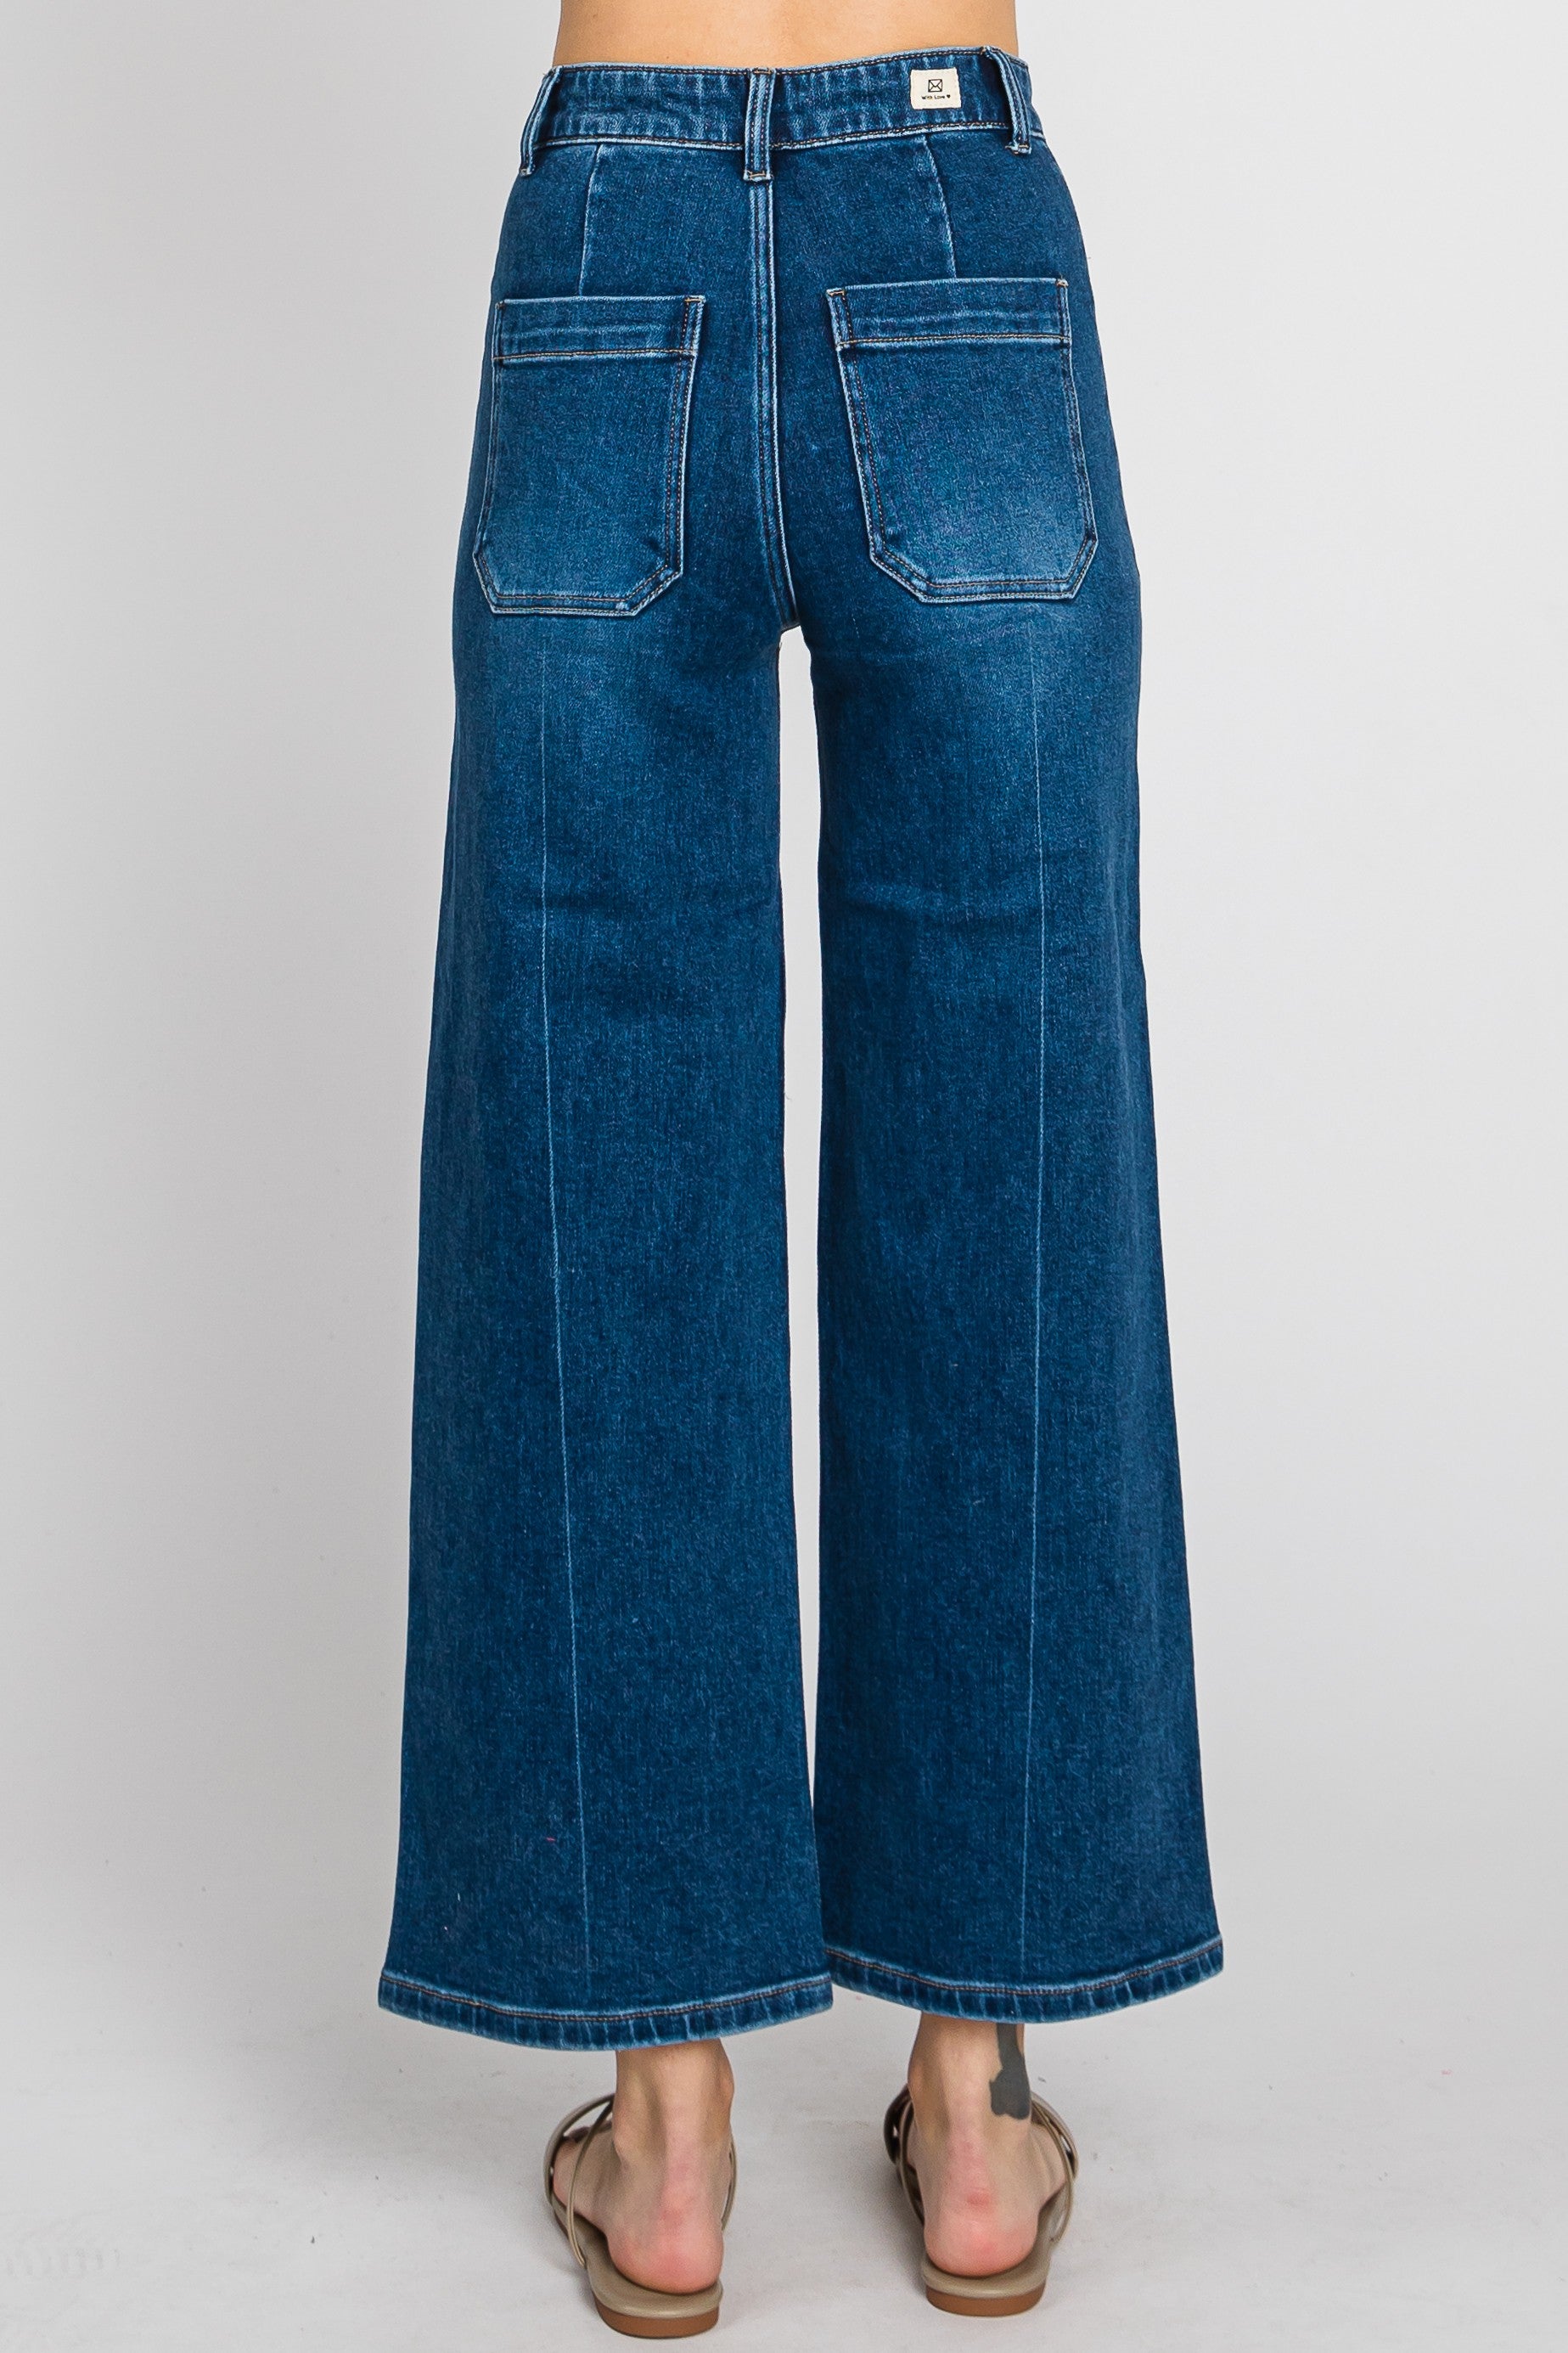 The Cara Patch Pocket Wide Leg Jeans by L.T.J